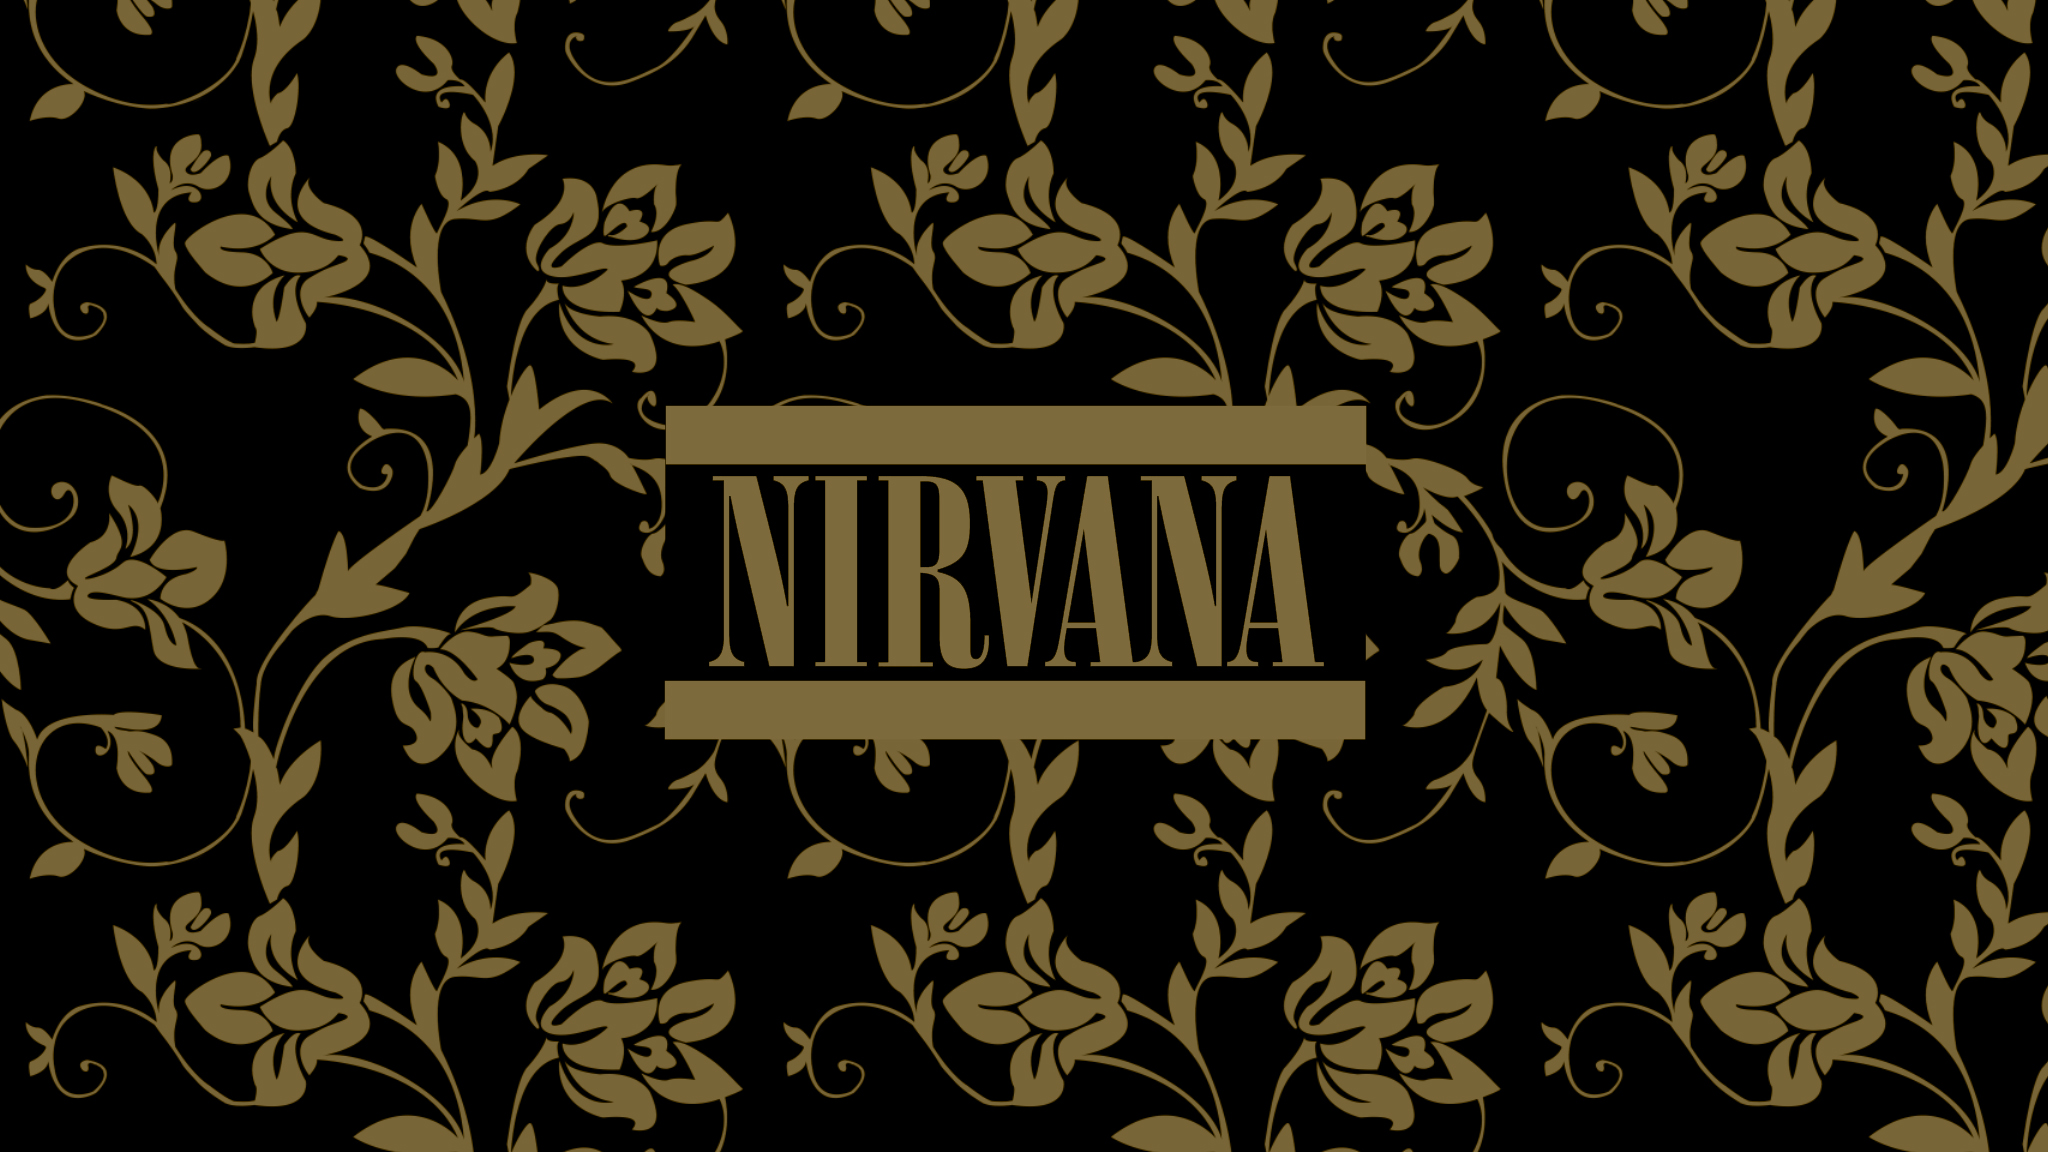 Nirvana Wallpaper by Razielthe9th on